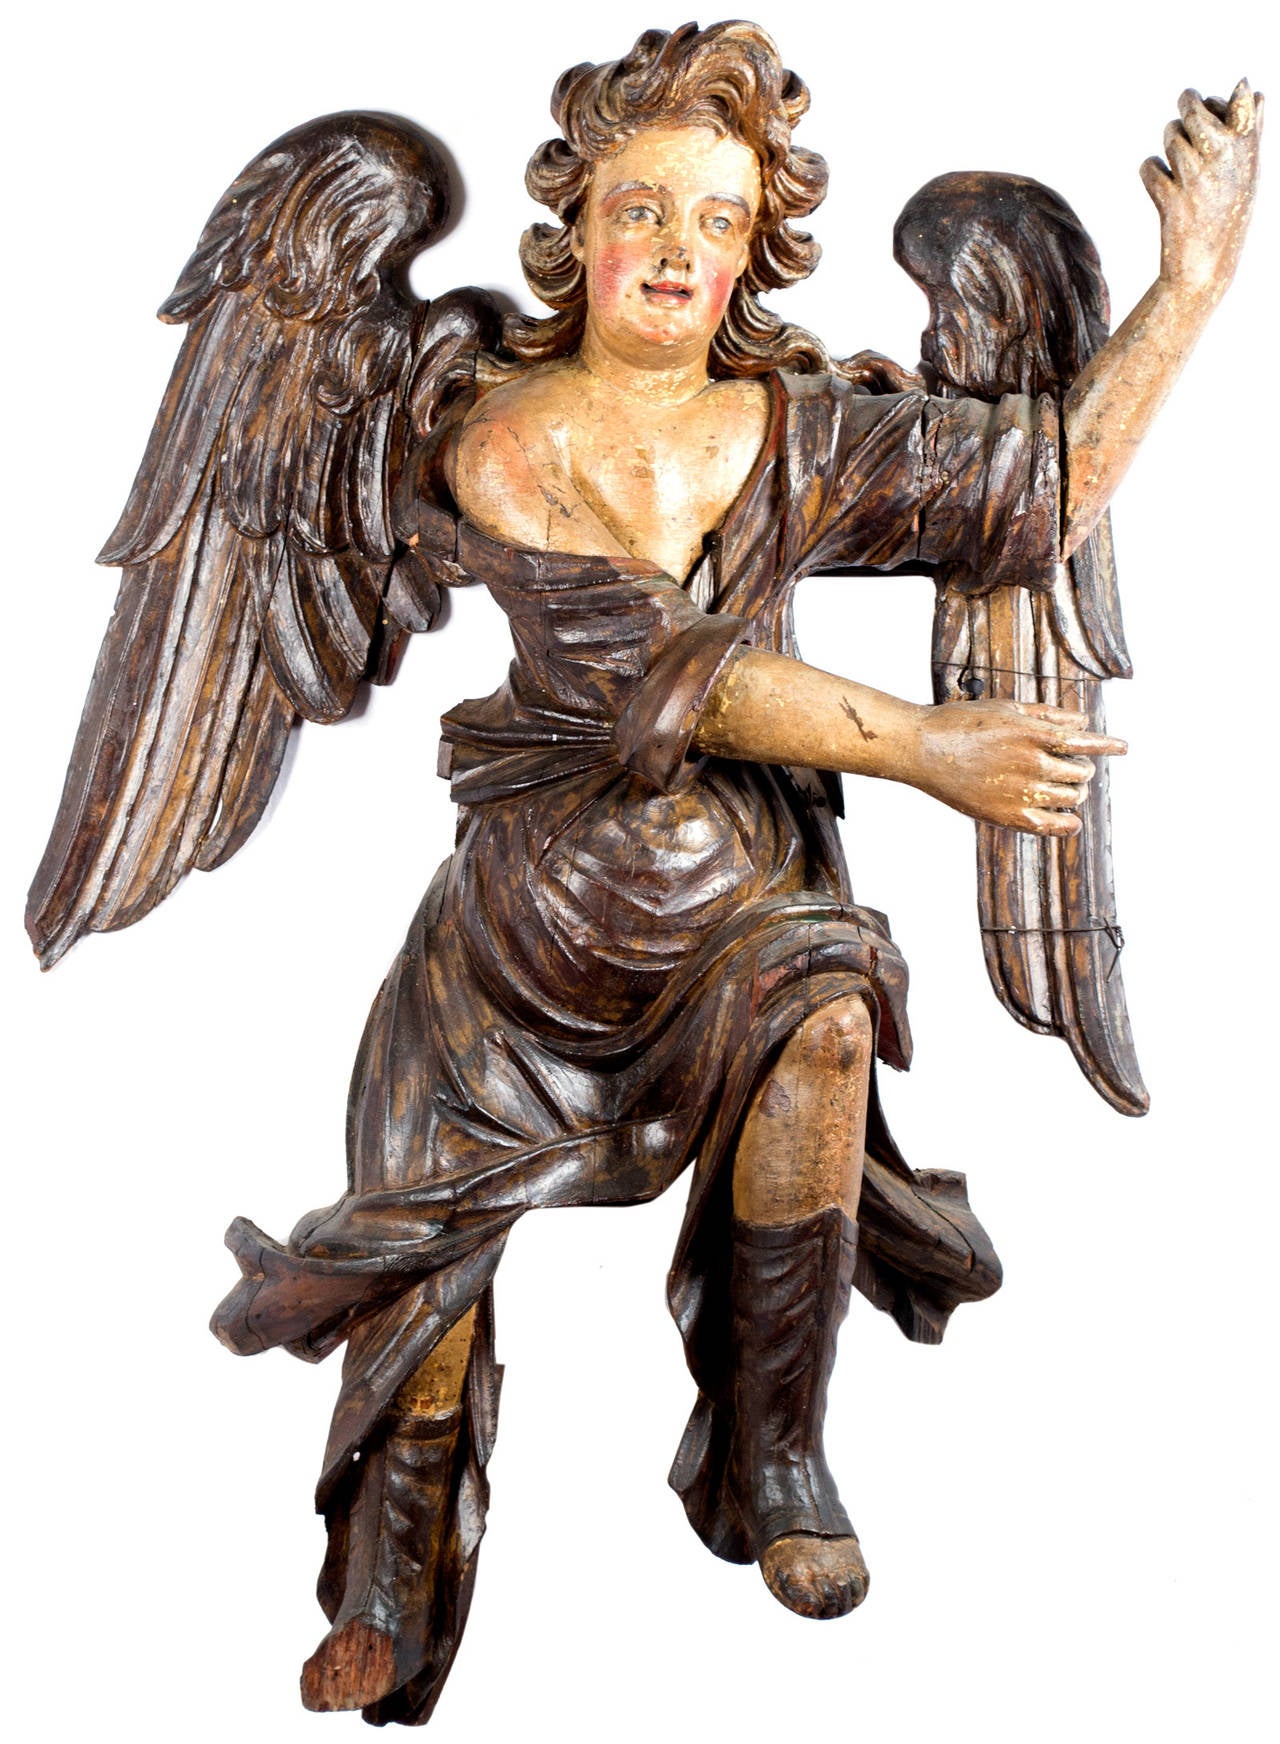 Meant to be mounted on a wall, each angel is almost life sized, beautifully carved, and meticulously painted. The statues were made in Northern Italy during the second or third quarter of the seventeenth century.